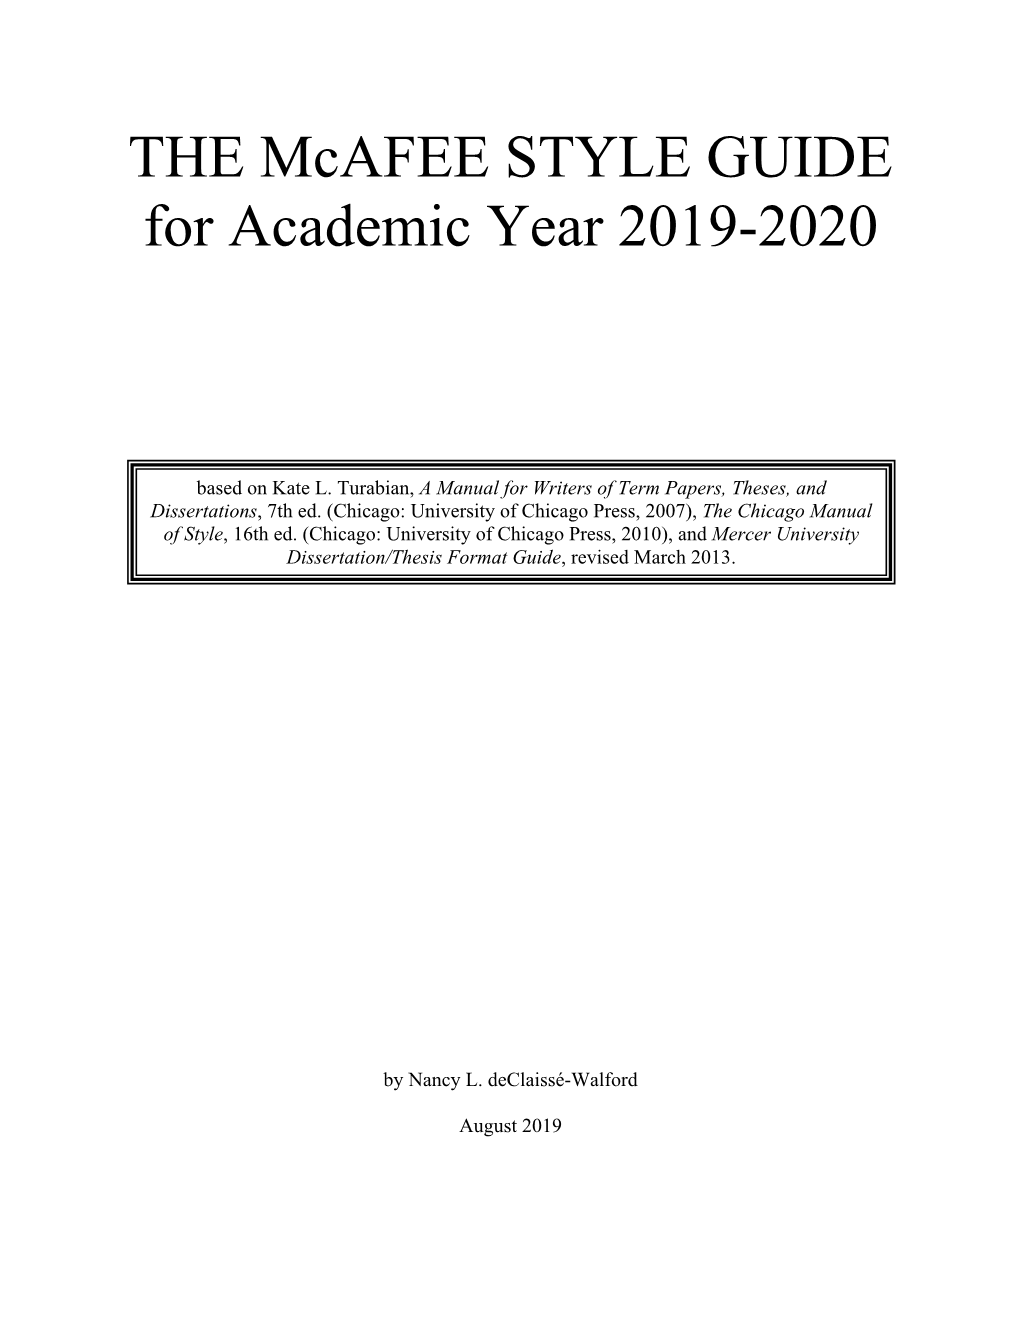 THE Mcafee STYLE GUIDE for Academic Year 2019-2020